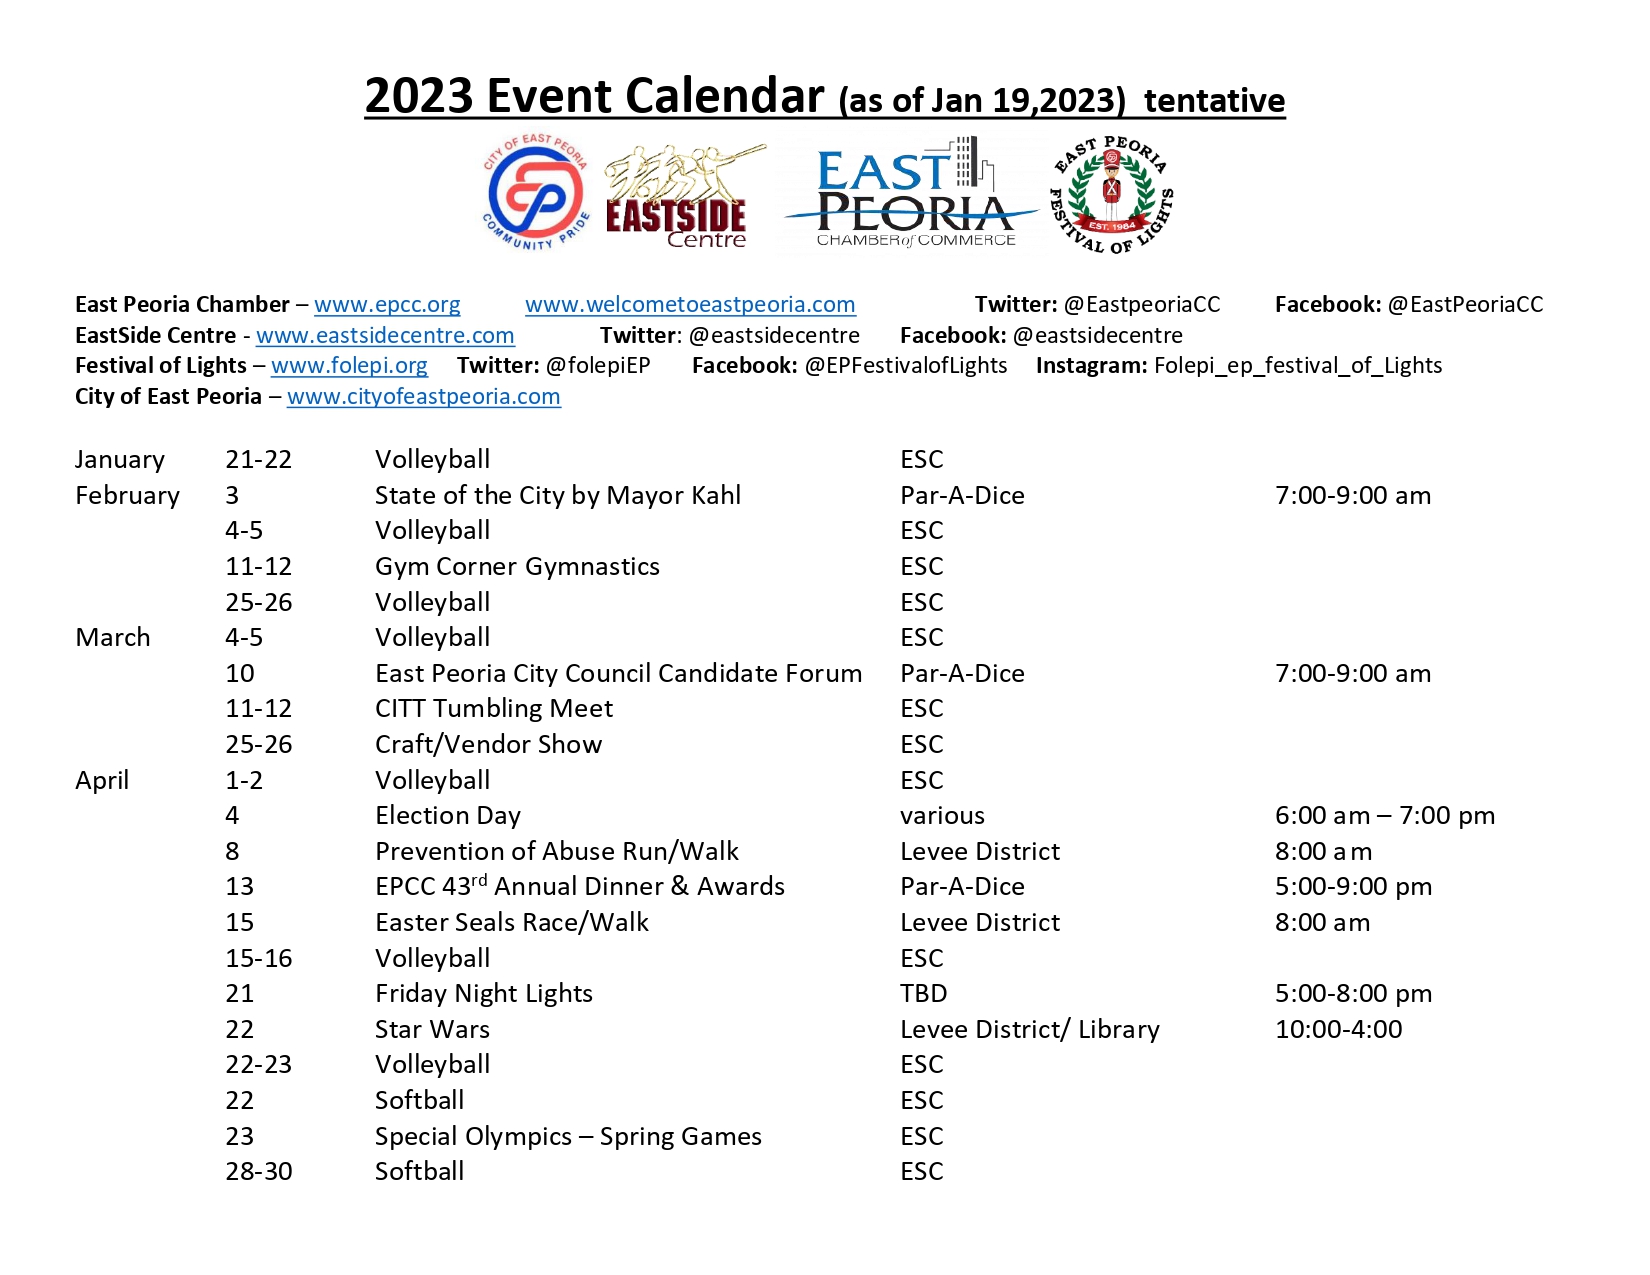 2023 Events list